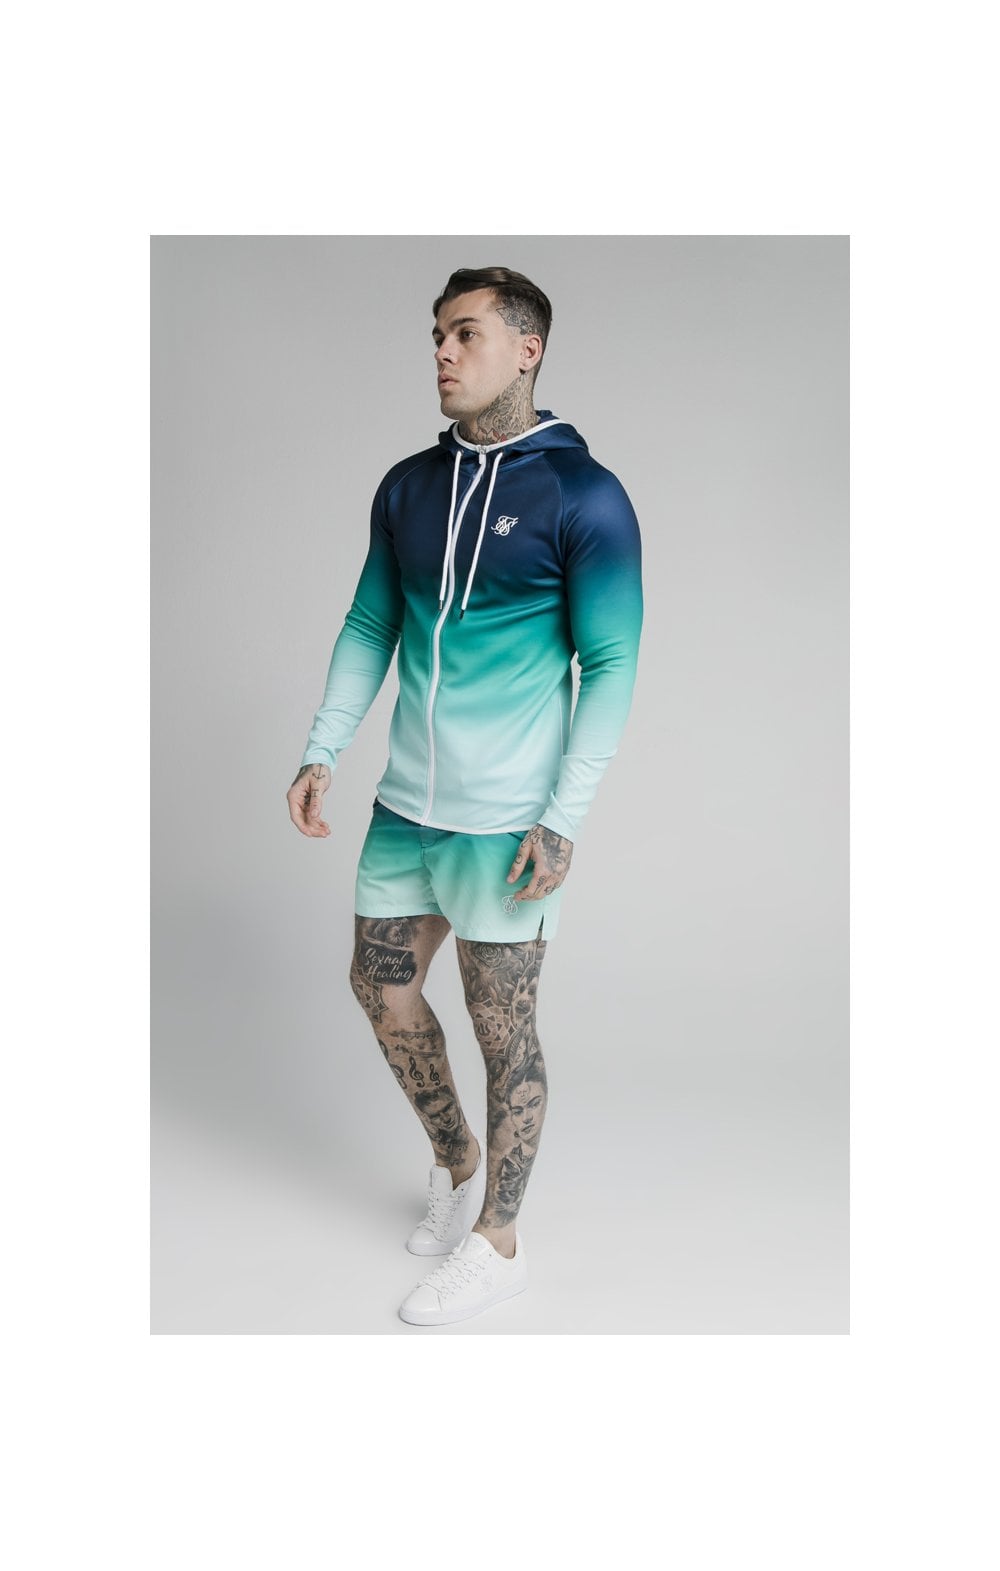 Load image into Gallery viewer, SikSilk Inset Fade Zip Through Hoodie - Navy Pacific Fade (4)